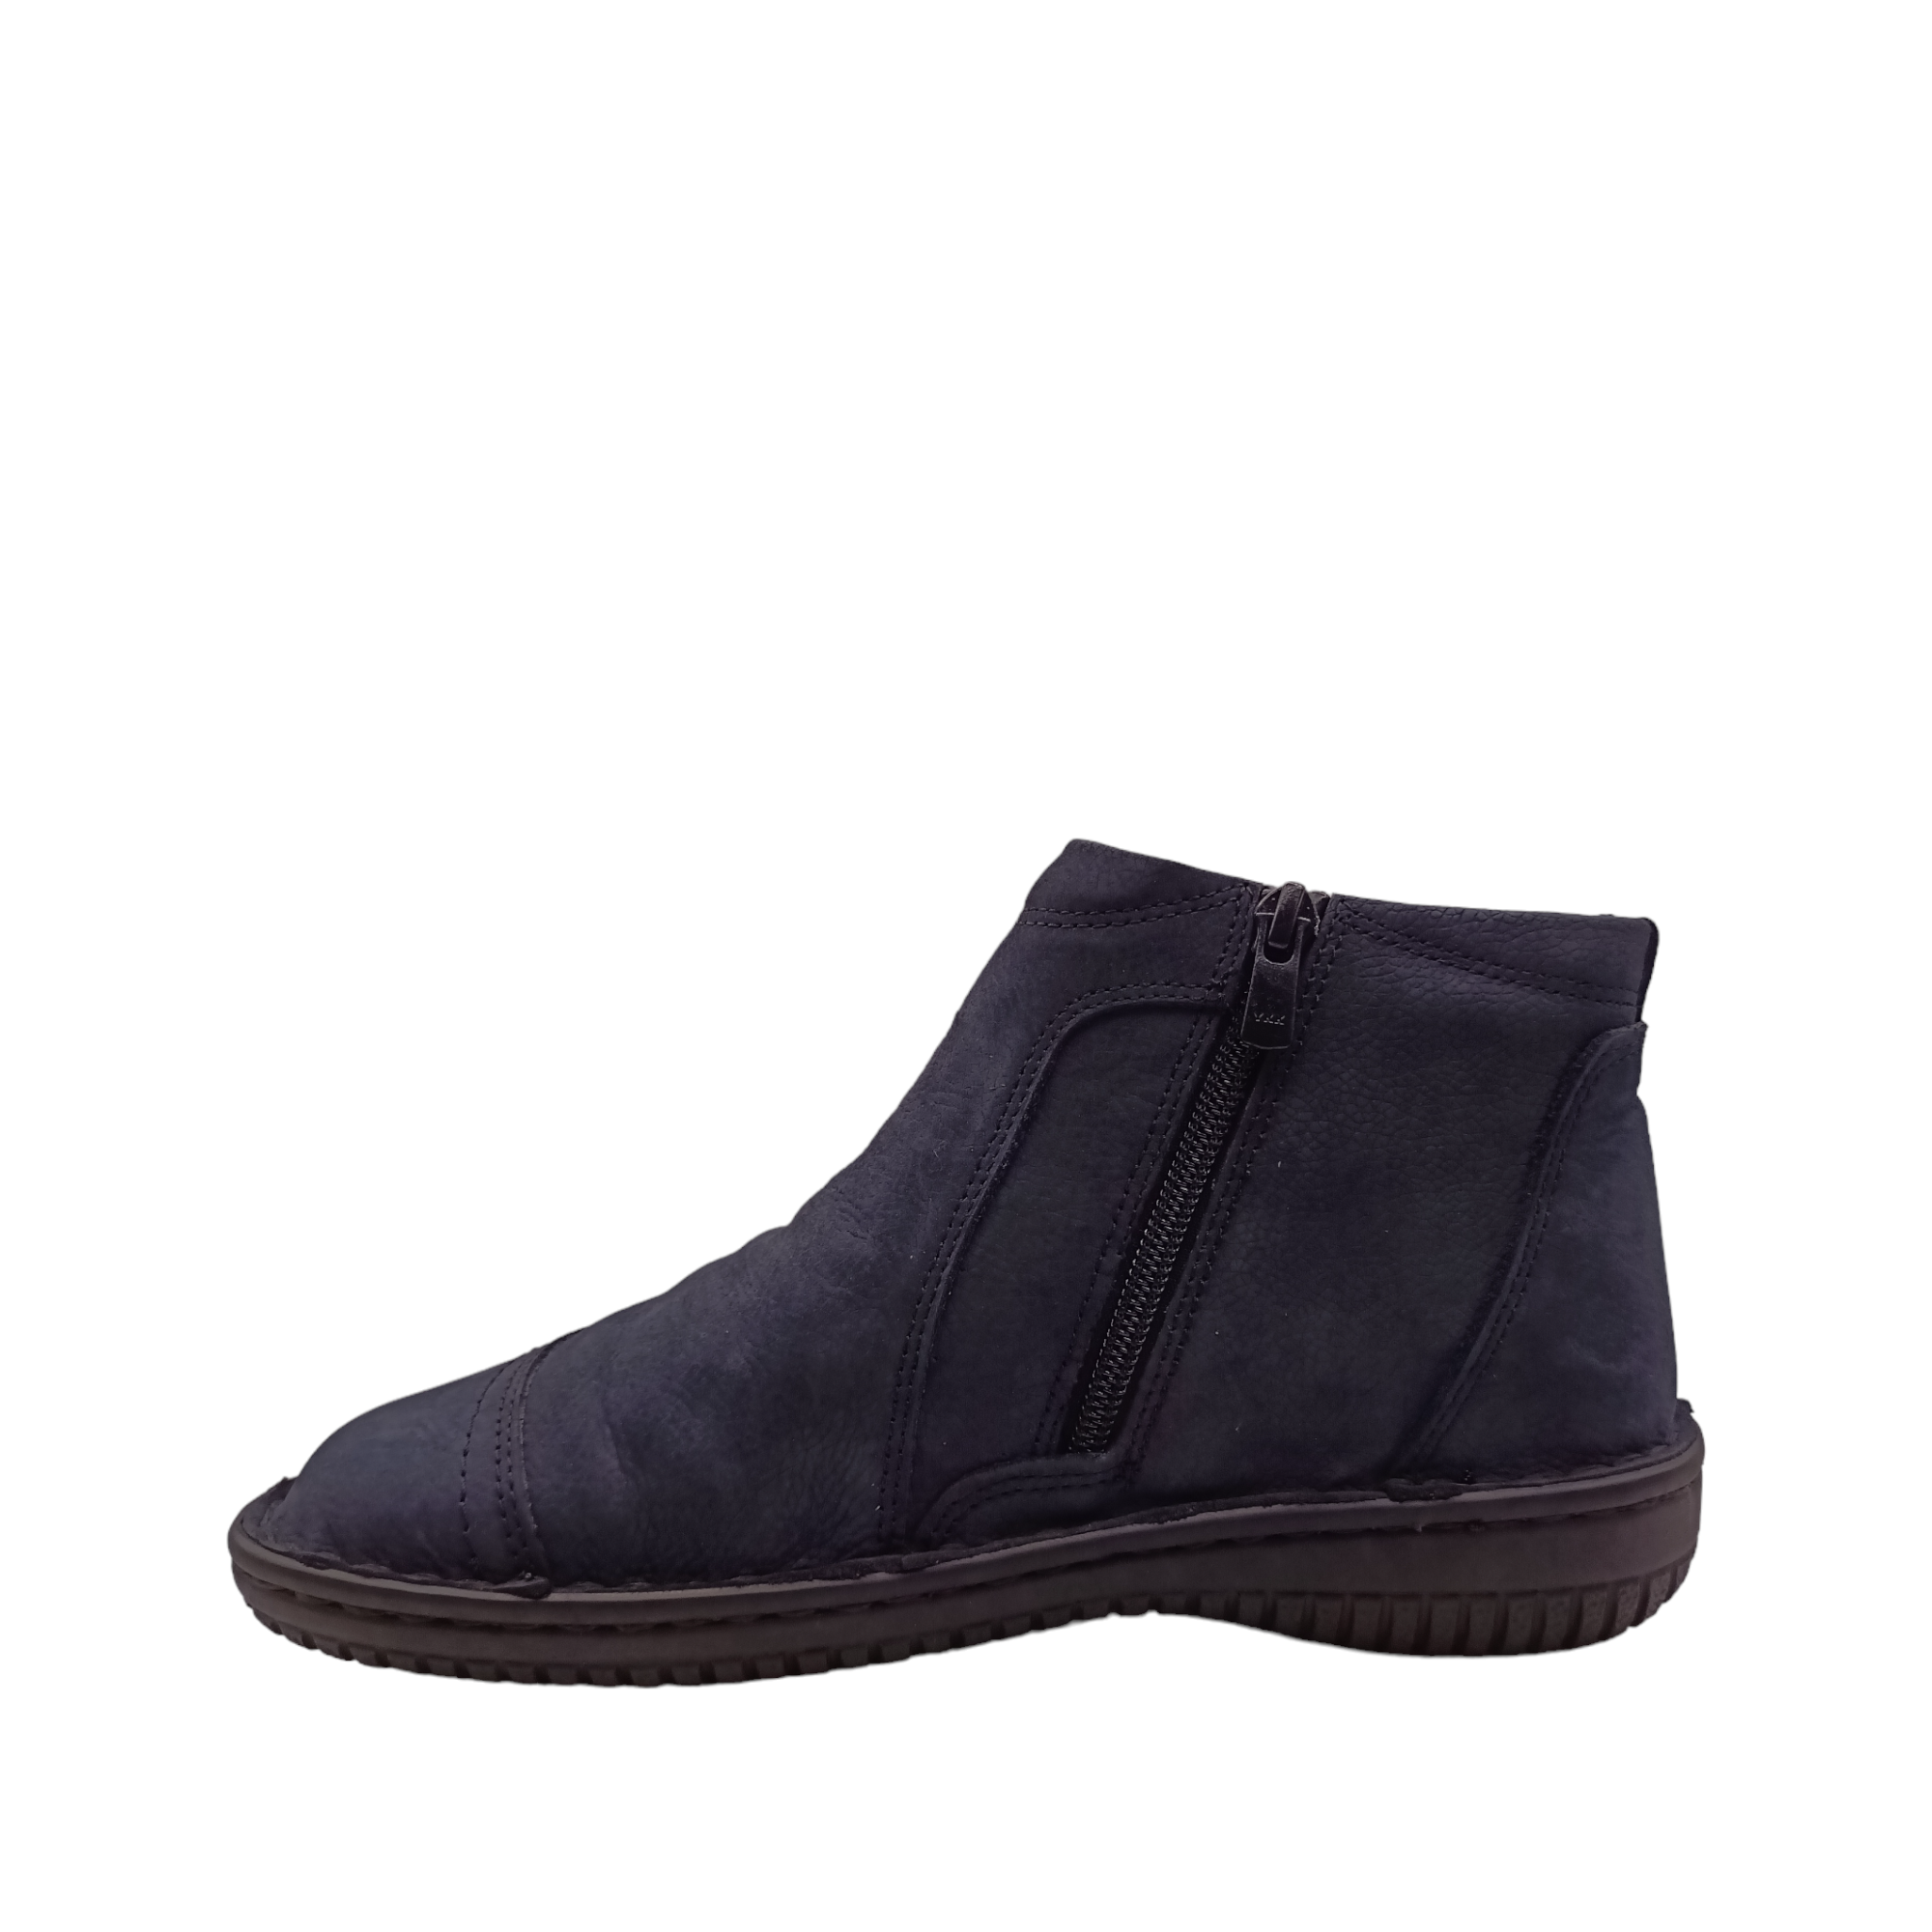 Shop CP522-32 Cabello - with shoe&amp;me - from Cabello - Boots - Boot, Winter, Womens - [collection]